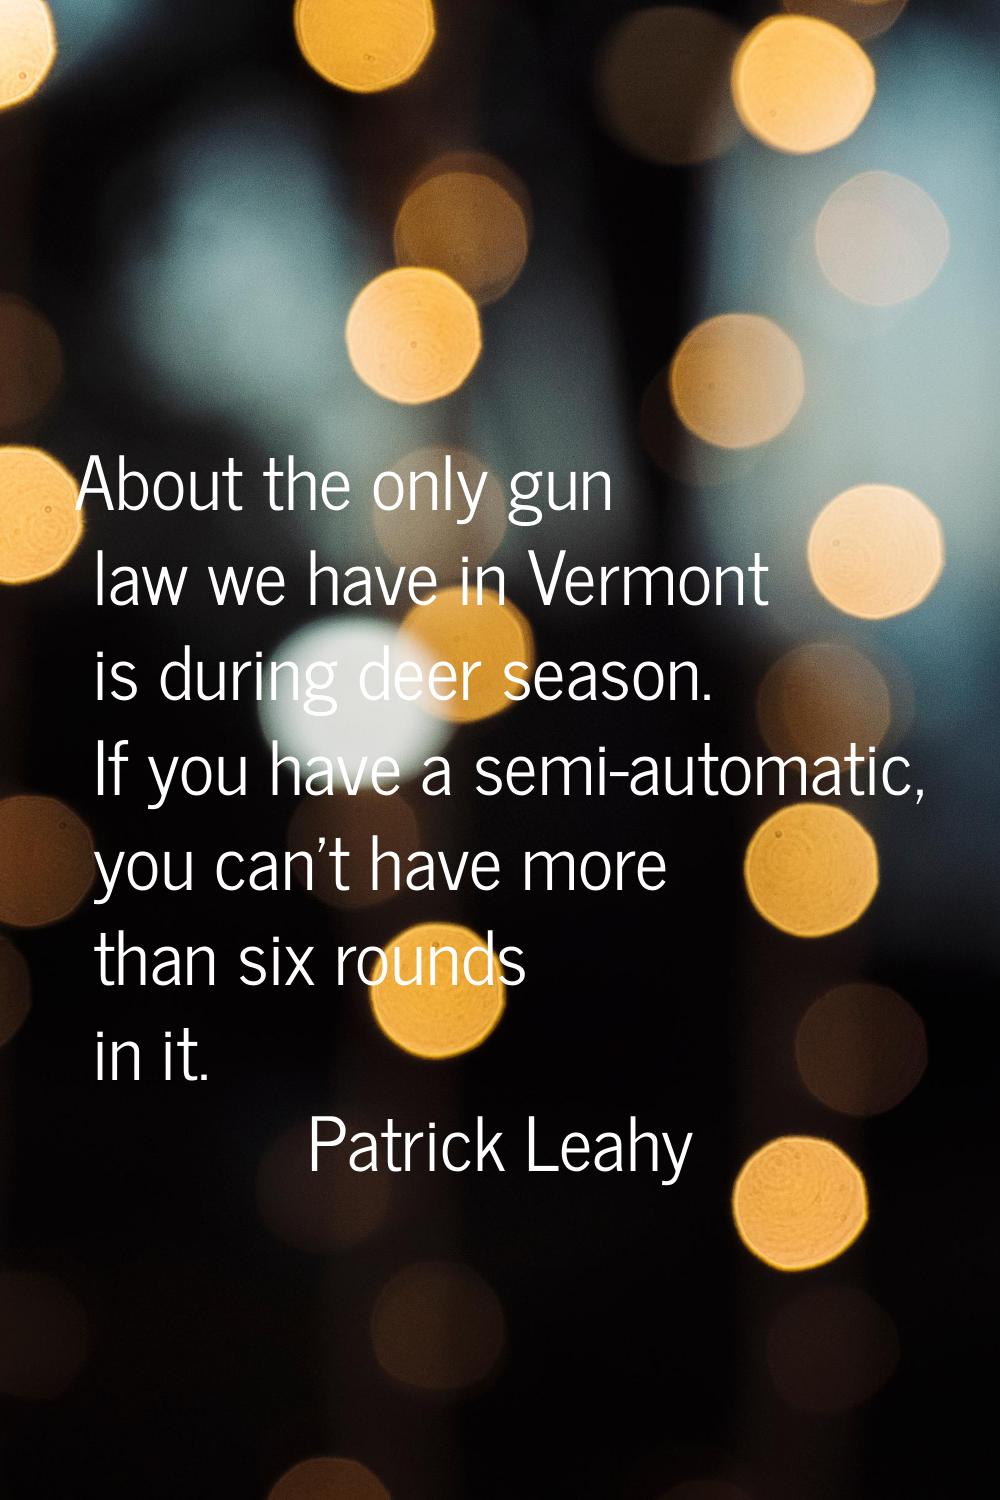 About the only gun law we have in Vermont is during deer season. If you have a semi-automatic, you 